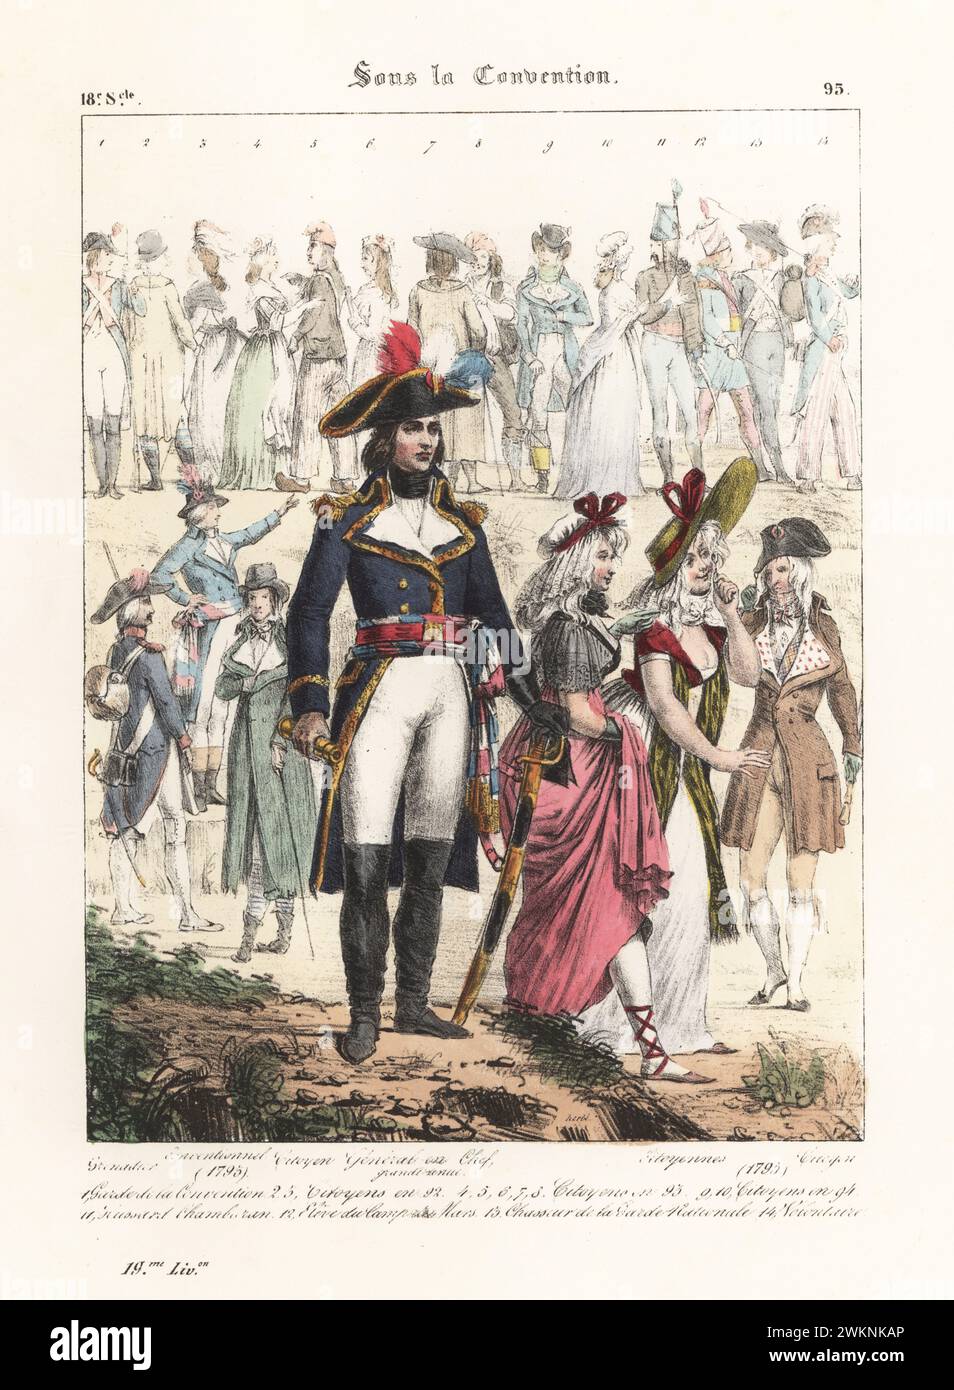 General in uniform (Napoleon?) of the French Republican Army, with Incroyables and Merveilleuses, under the Convention.. Grenadier, Conventionnel, Citoyen, General en Chef, Citoyennes. Sous la Convention. Handcoloured lithograph by Godard after an illustration by Charles Auguste Herbé from his own Costumes Francais, Civils, Militaires et Religieux, French Costumes, Civil, Military and Religious, Maison Martinet, Paris, 1837. Stock Photo